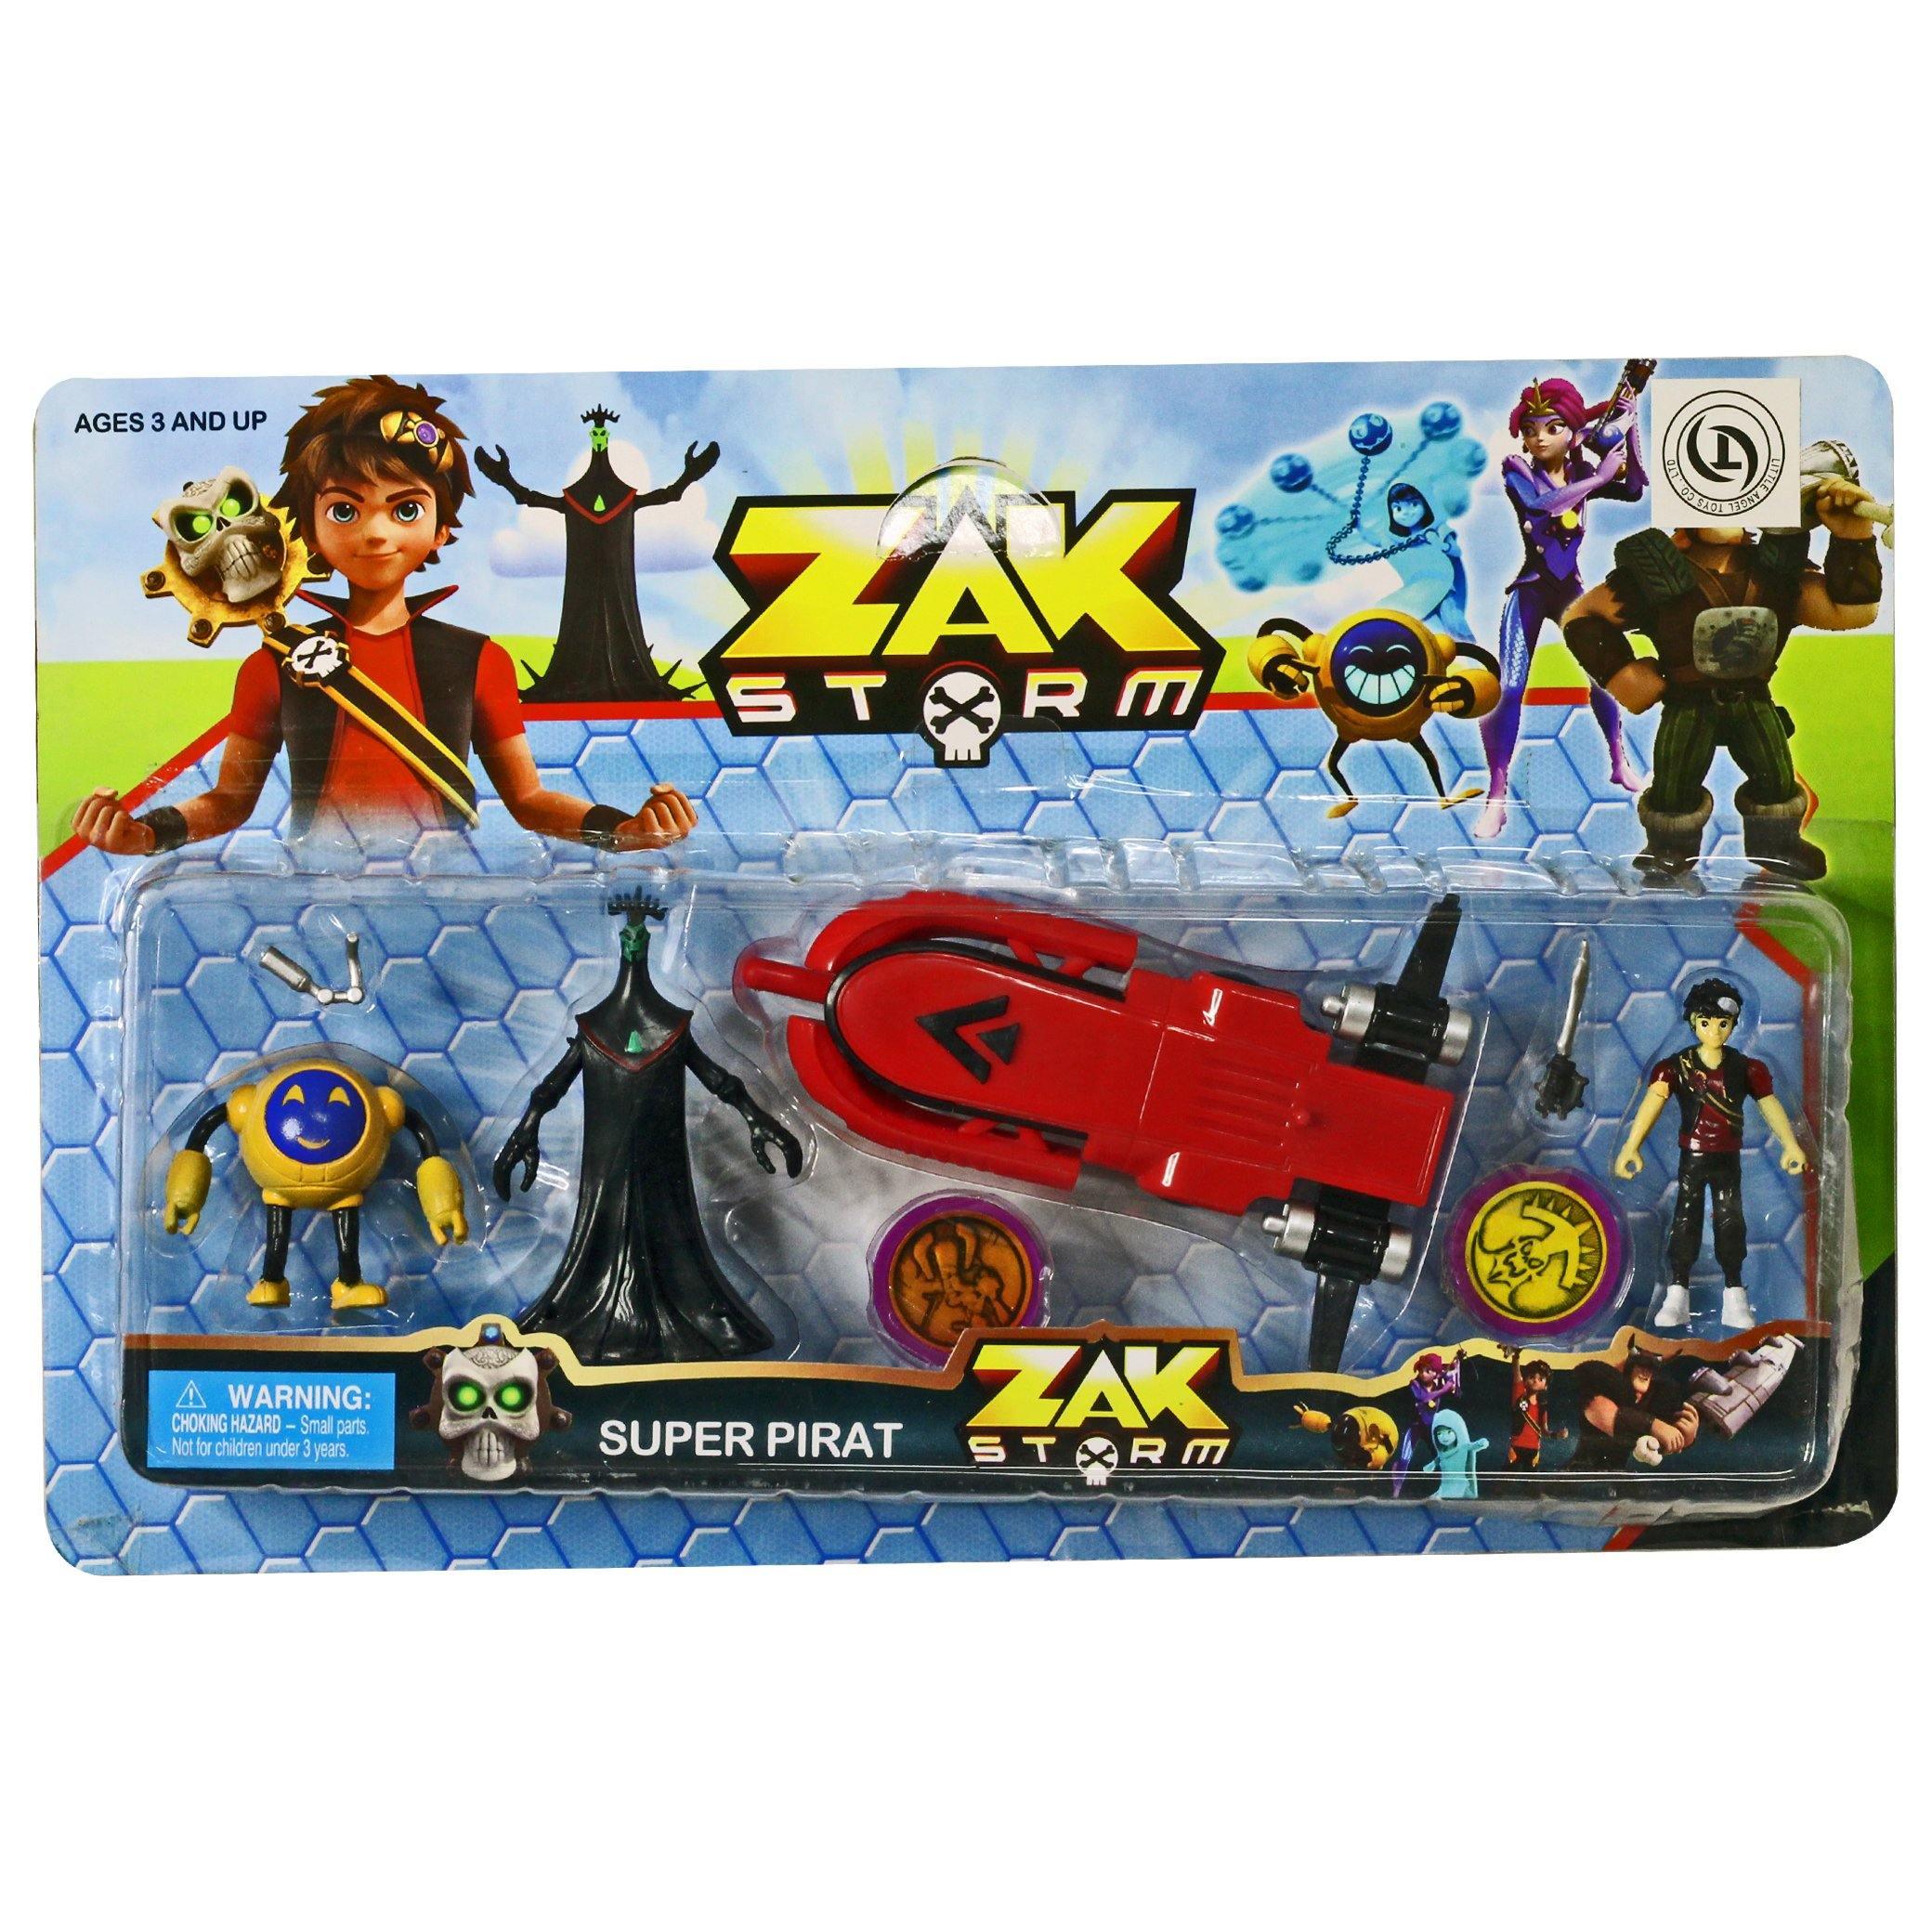 Zak Storm Characters Play Set - BumbleToys - 5-7 Years, Action Battling, Boys, Toy Land